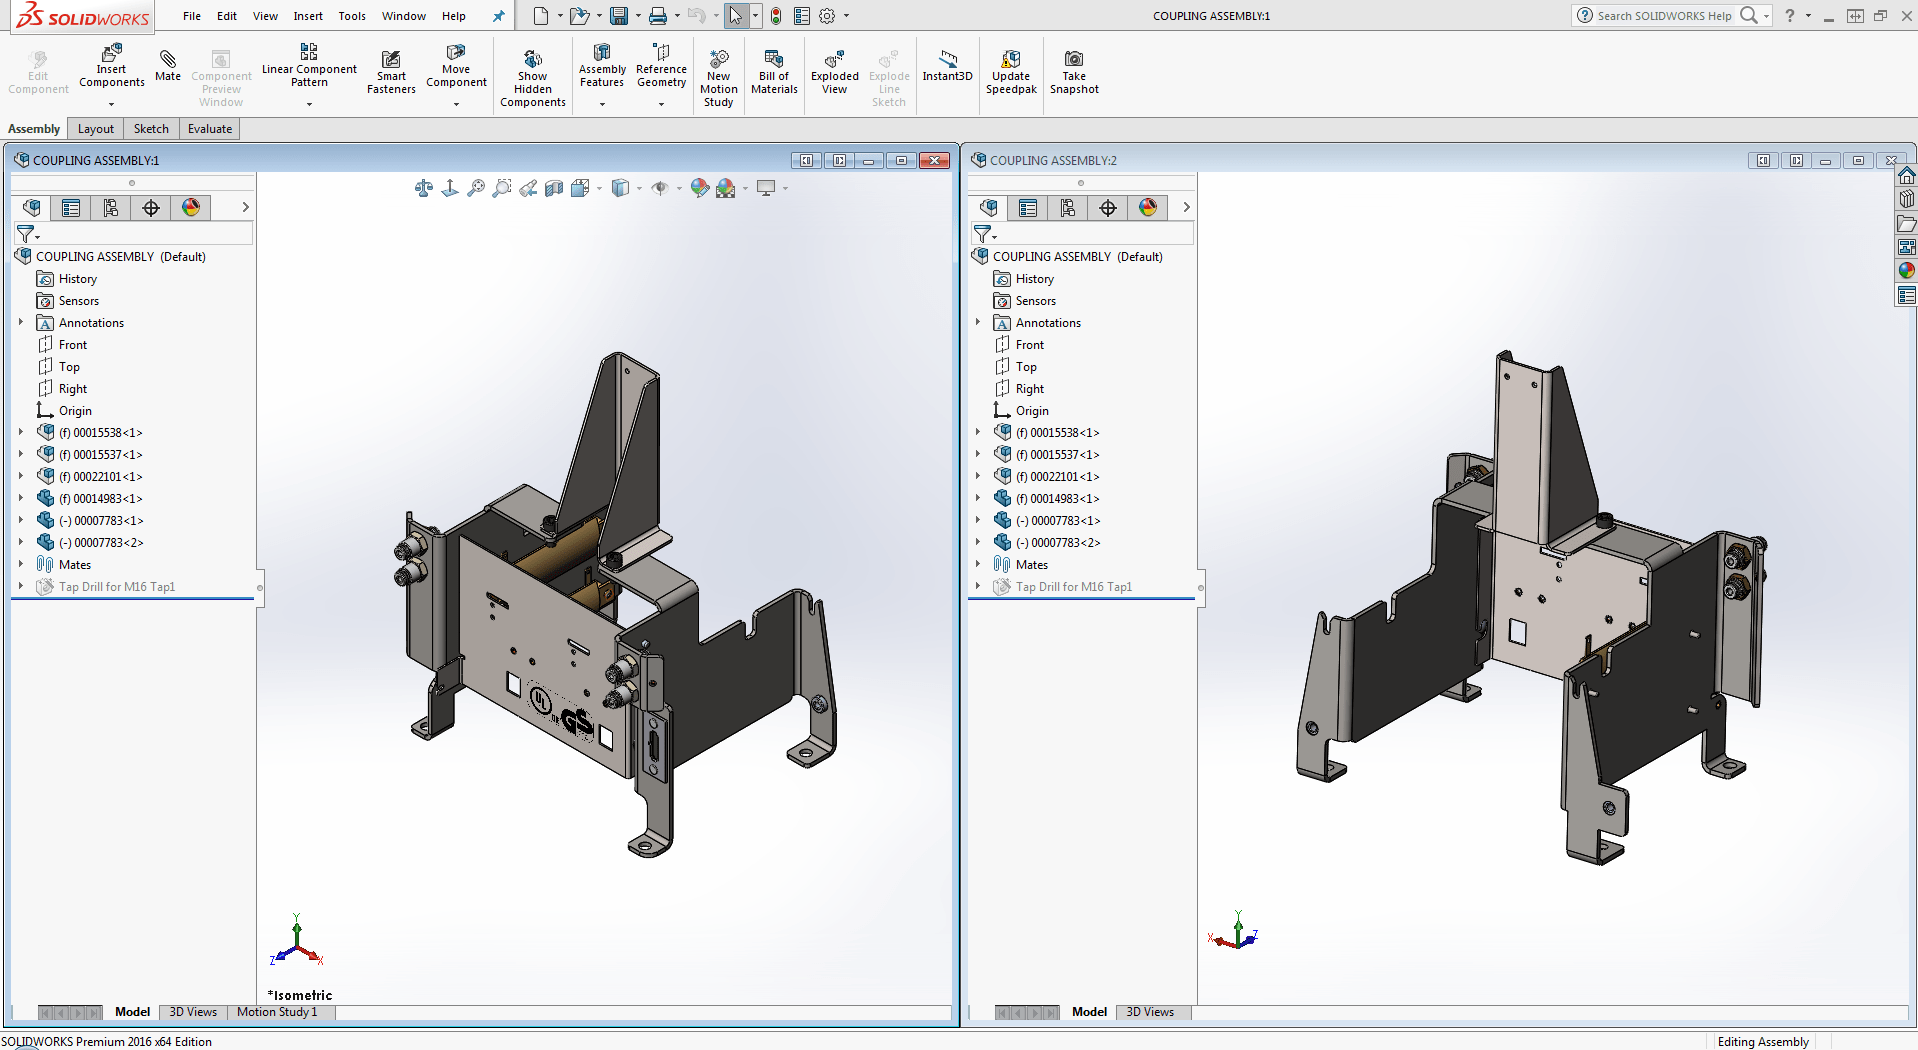 SOLIDWORKS: A "New Window" to Productivityimage004